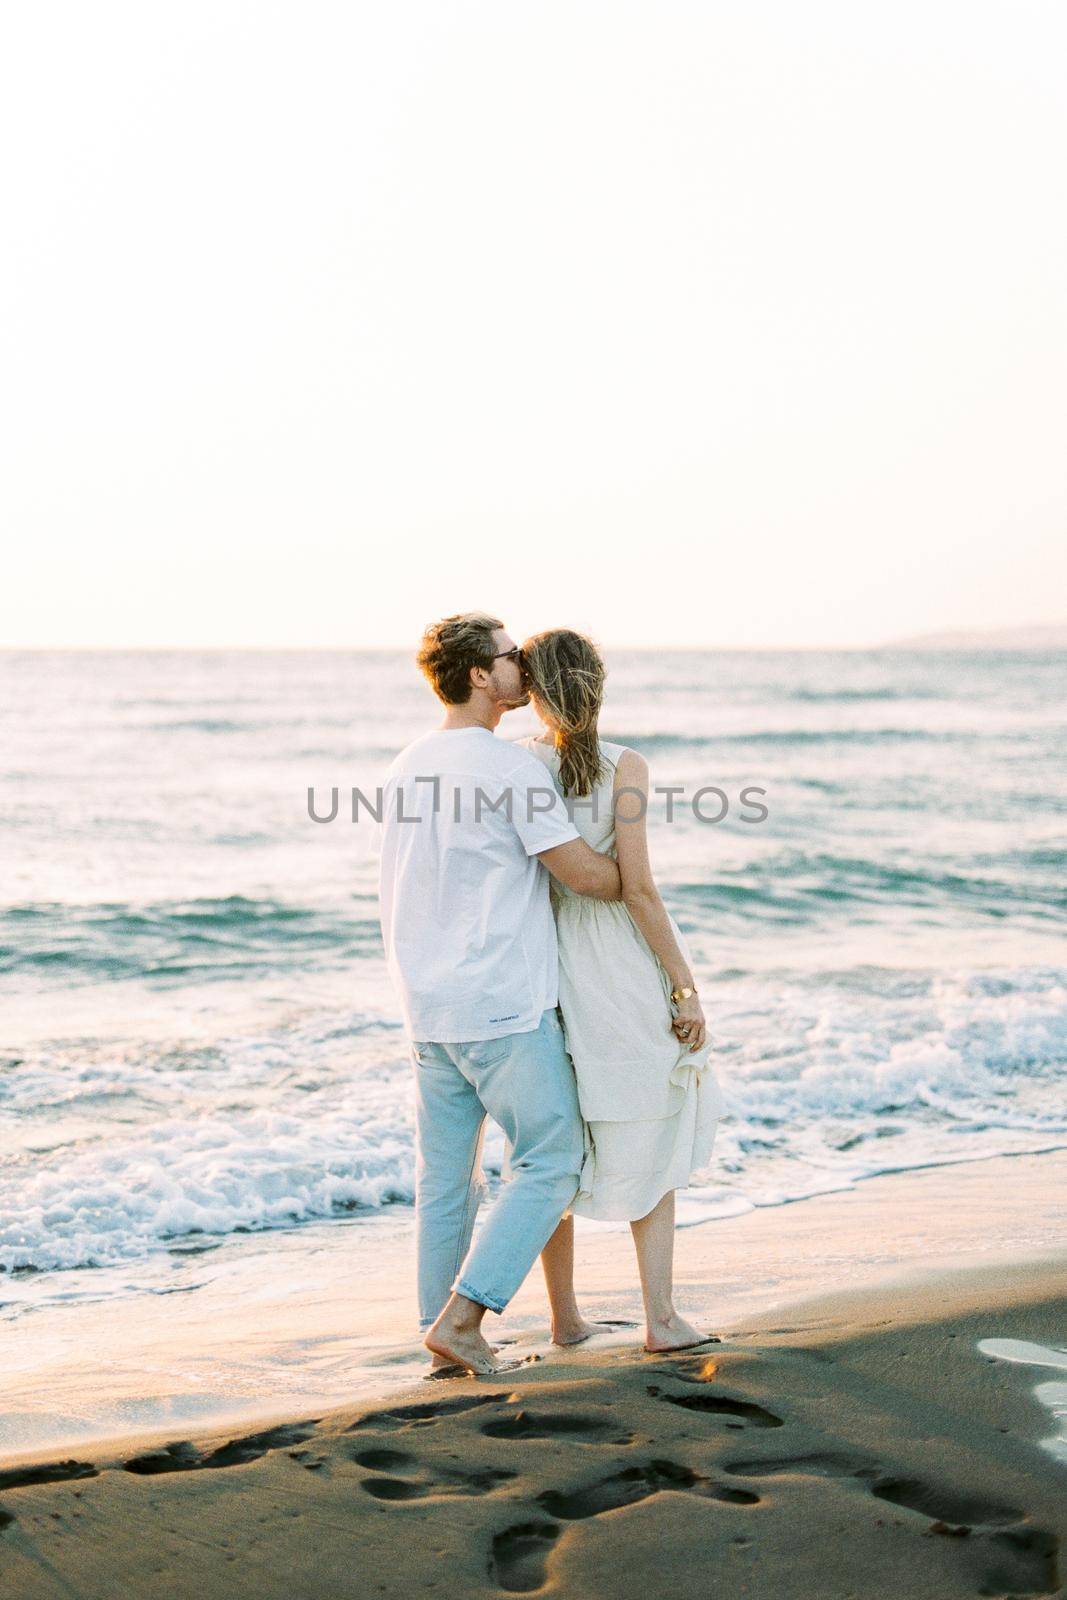 Man hugs and kisses woman on the temple while standing on the beach. Back view. High quality photo